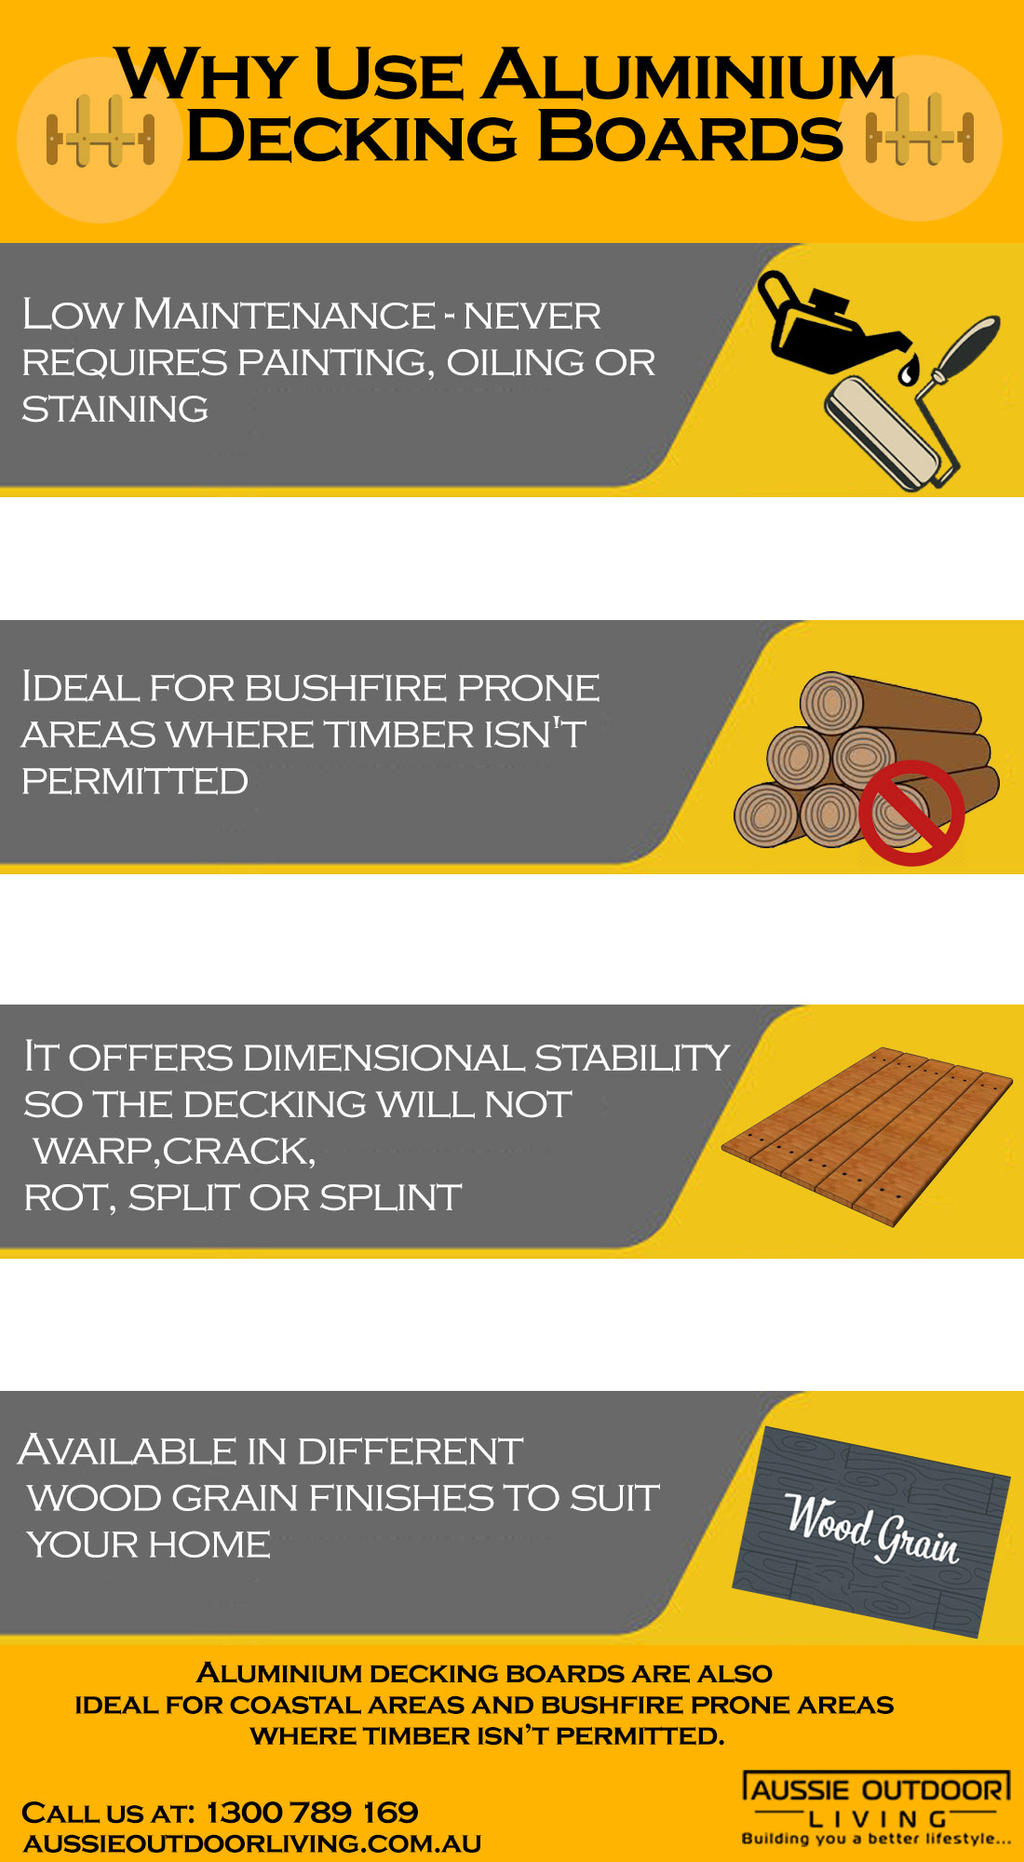 Why Use Aluminium Decking Boards